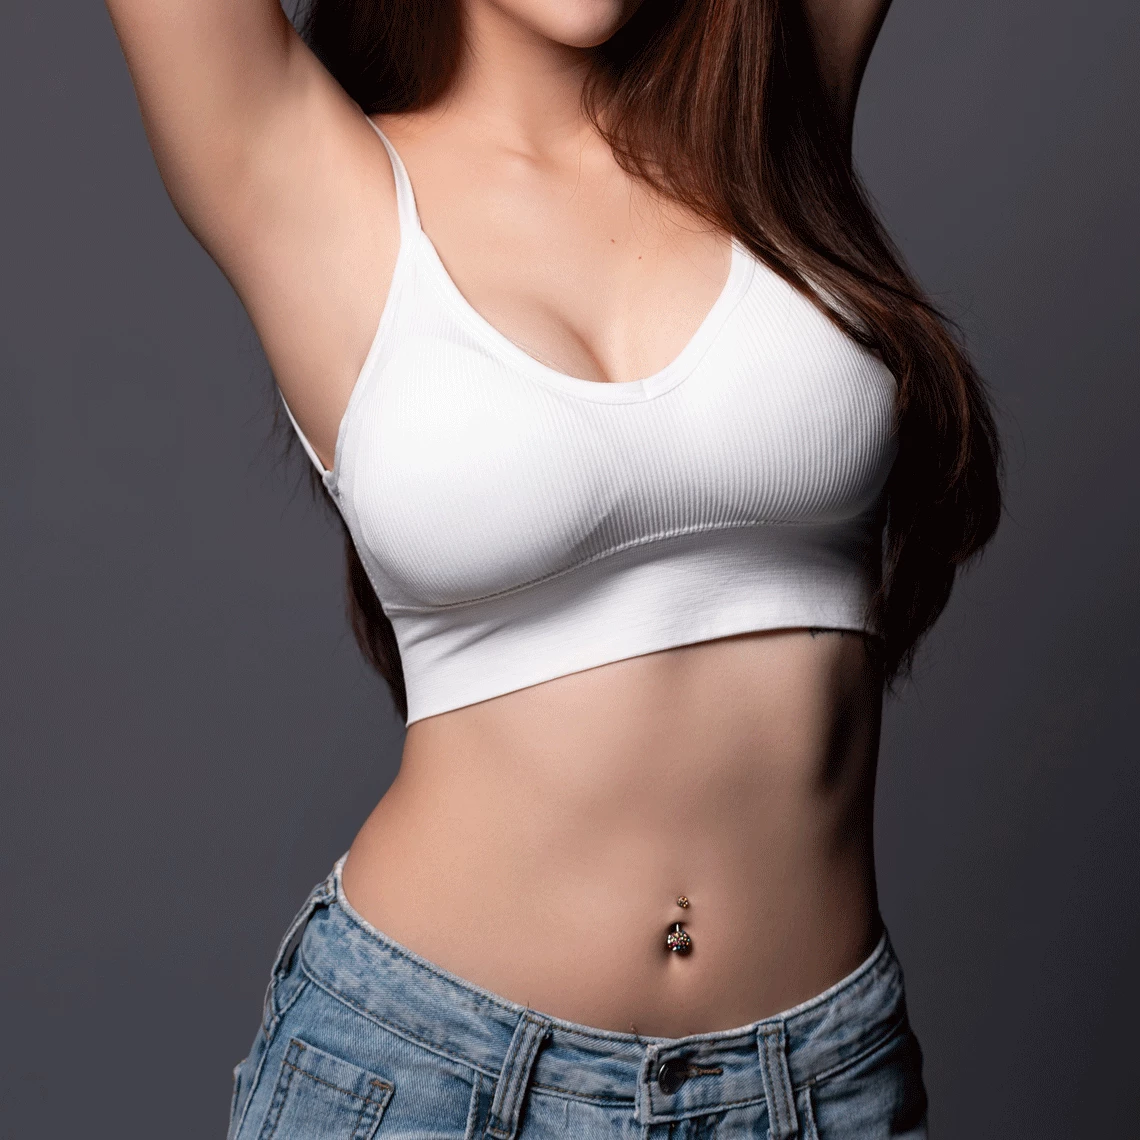 wonderful plastic surgery hospital in korea breast implant removal surgery information